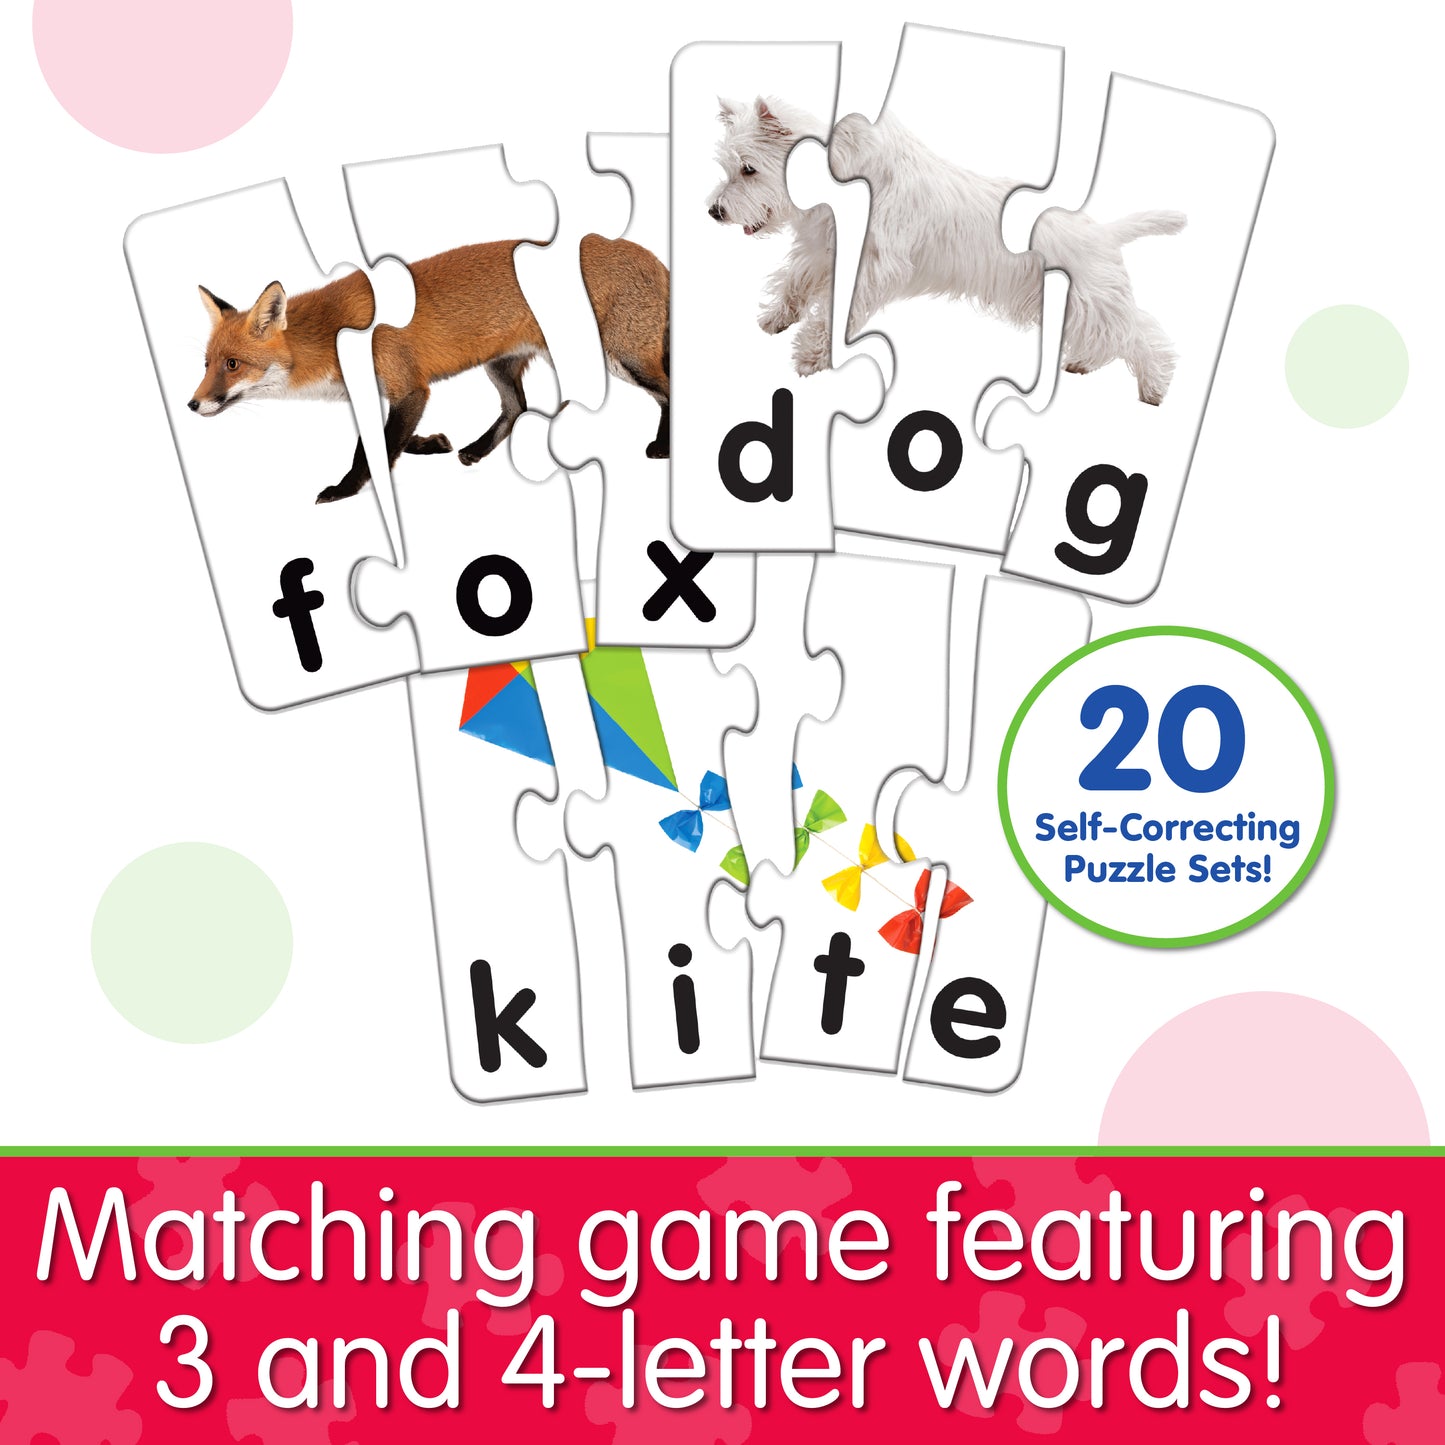 Infographic about Match It - Spelling that says, "Matching game featuring 3 and 4-letter words!"